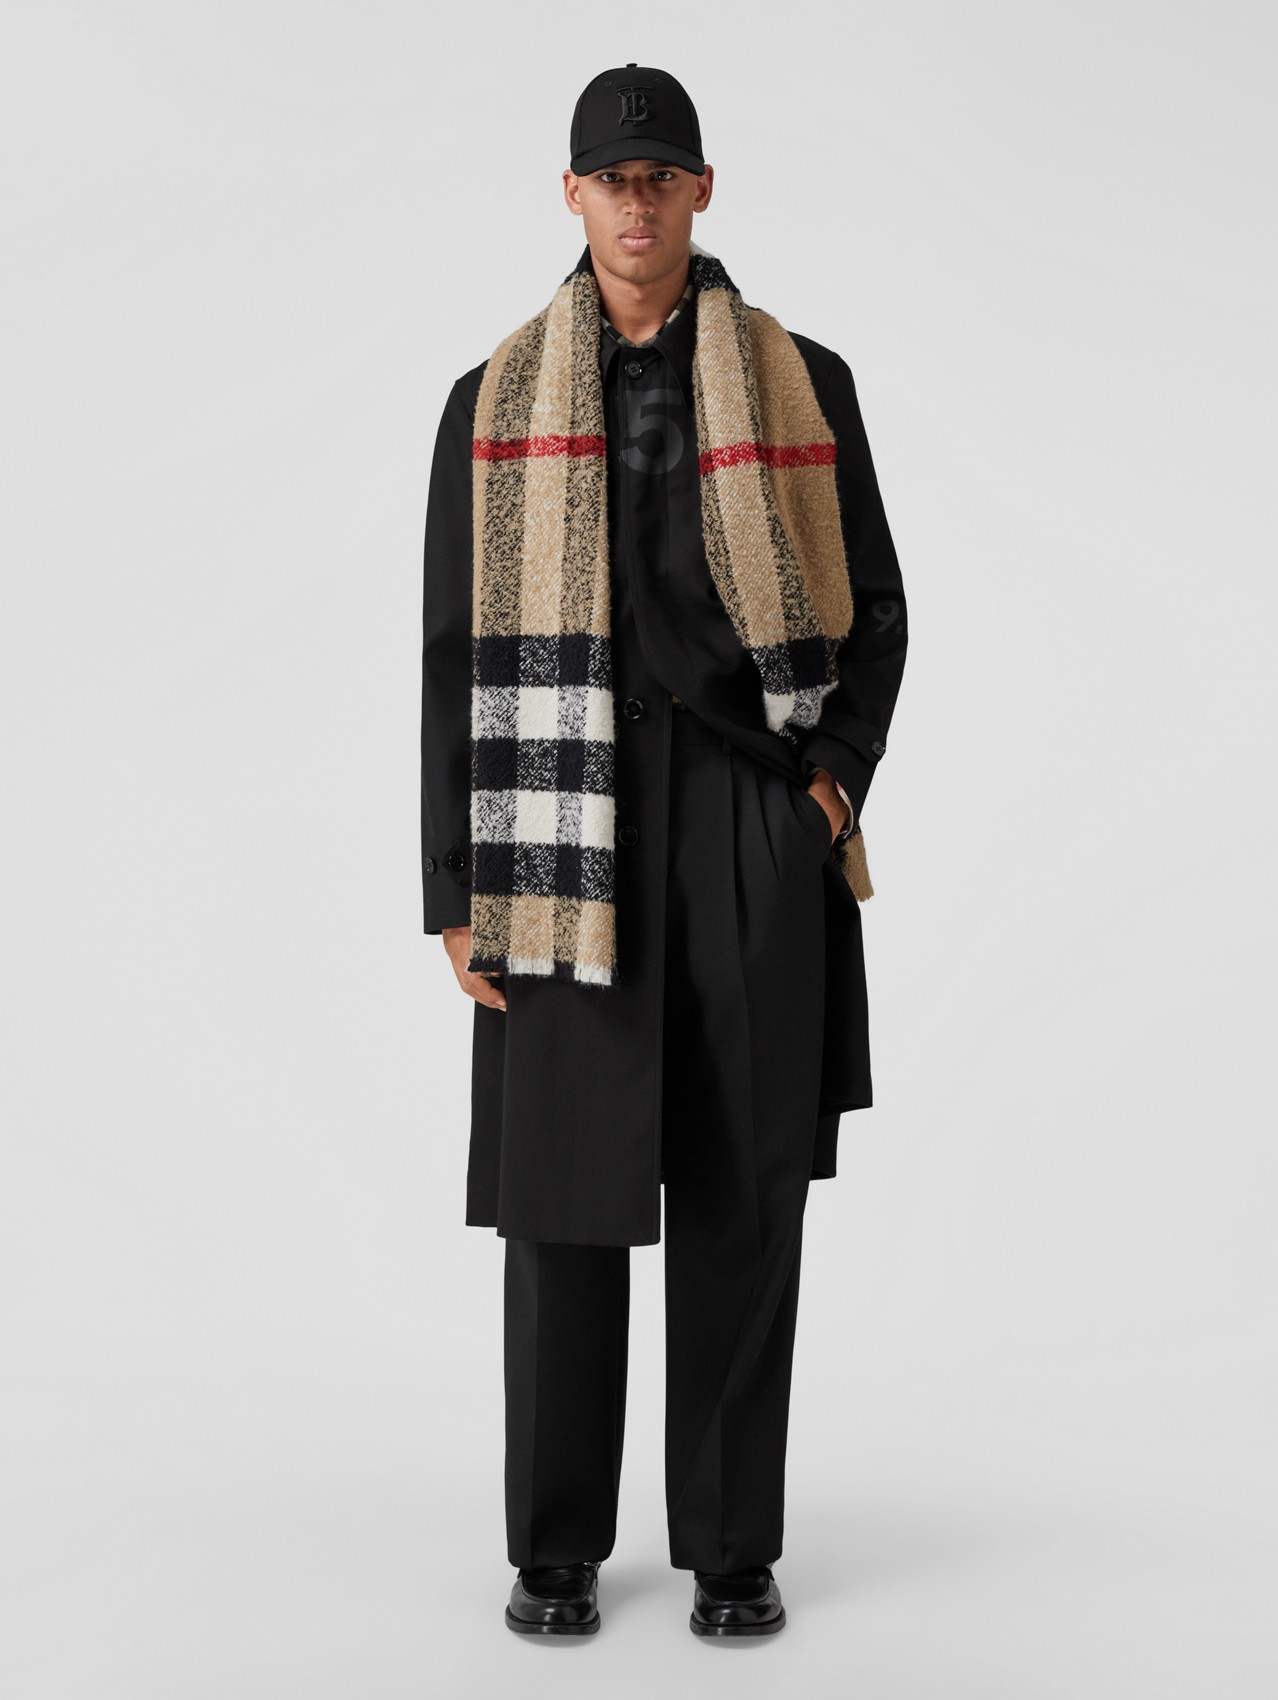 Men's Luxury Accessories | All Accessories | Burberry® Official